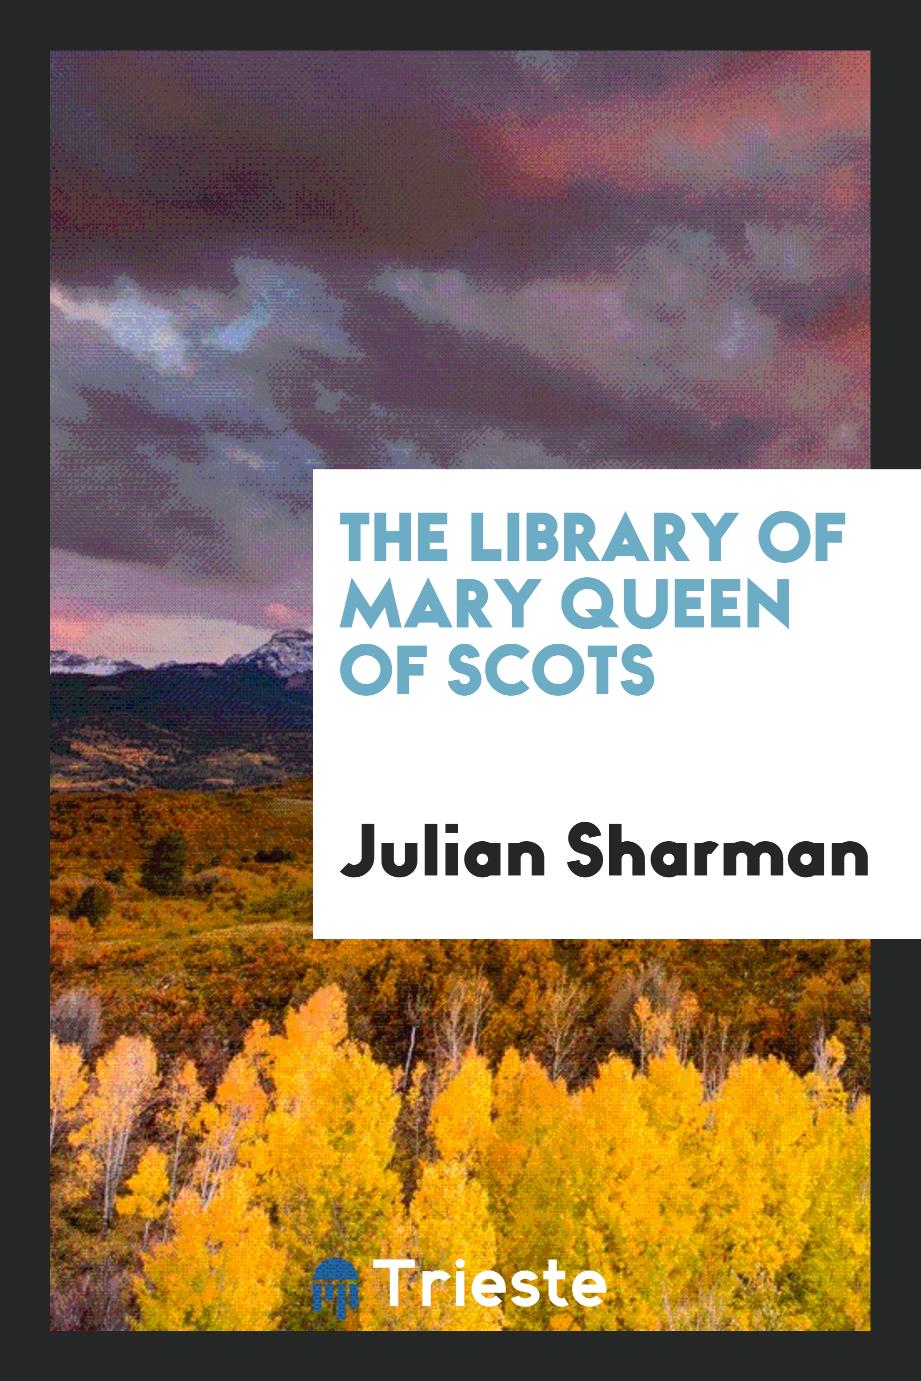 The Library of Mary Queen of Scots